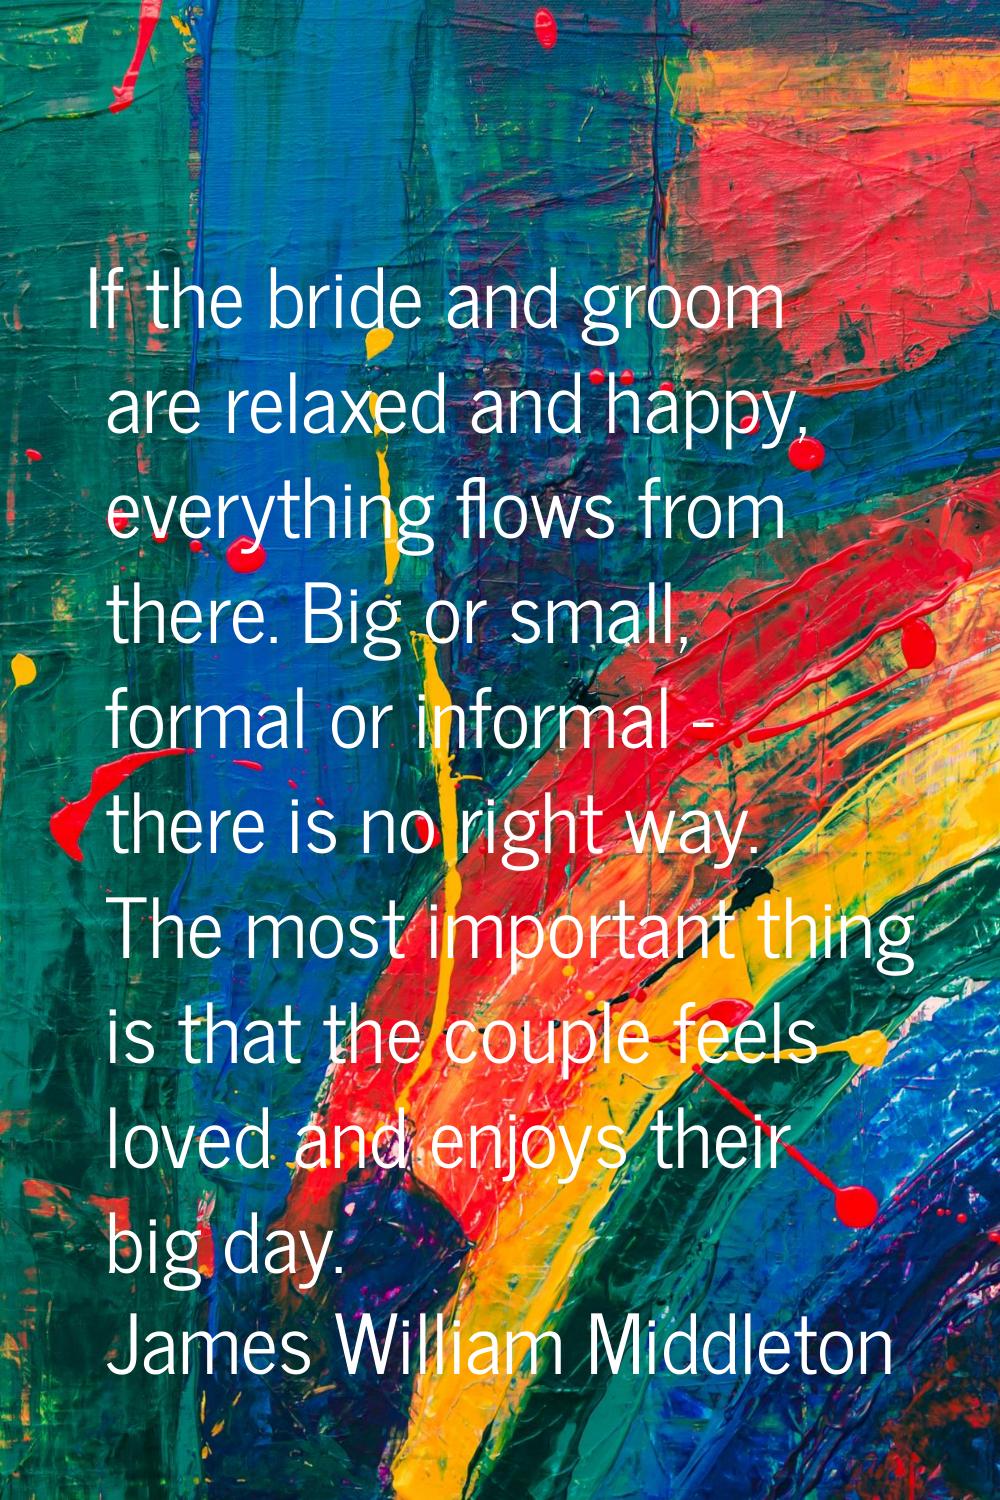 If the bride and groom are relaxed and happy, everything flows from there. Big or small, formal or 